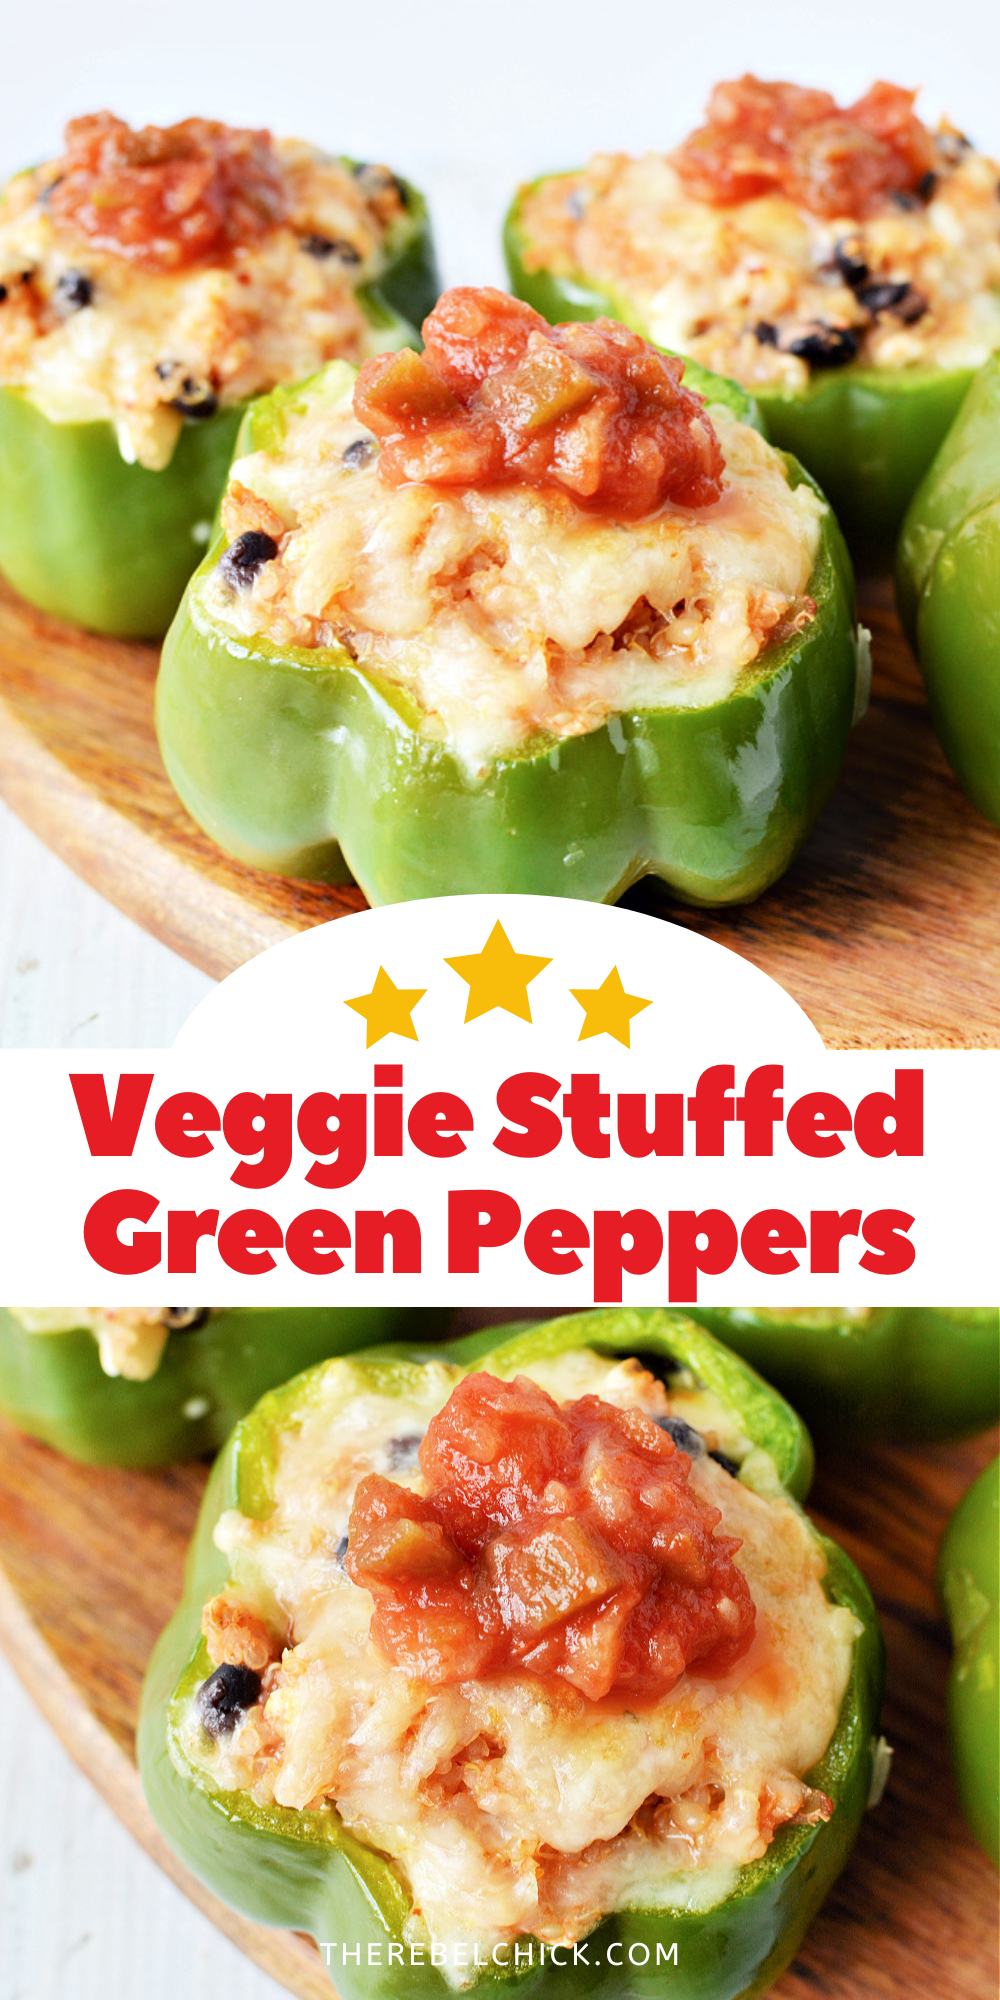 Vegetarian Stuffed Green Peppers Recipe for Meatless Monday